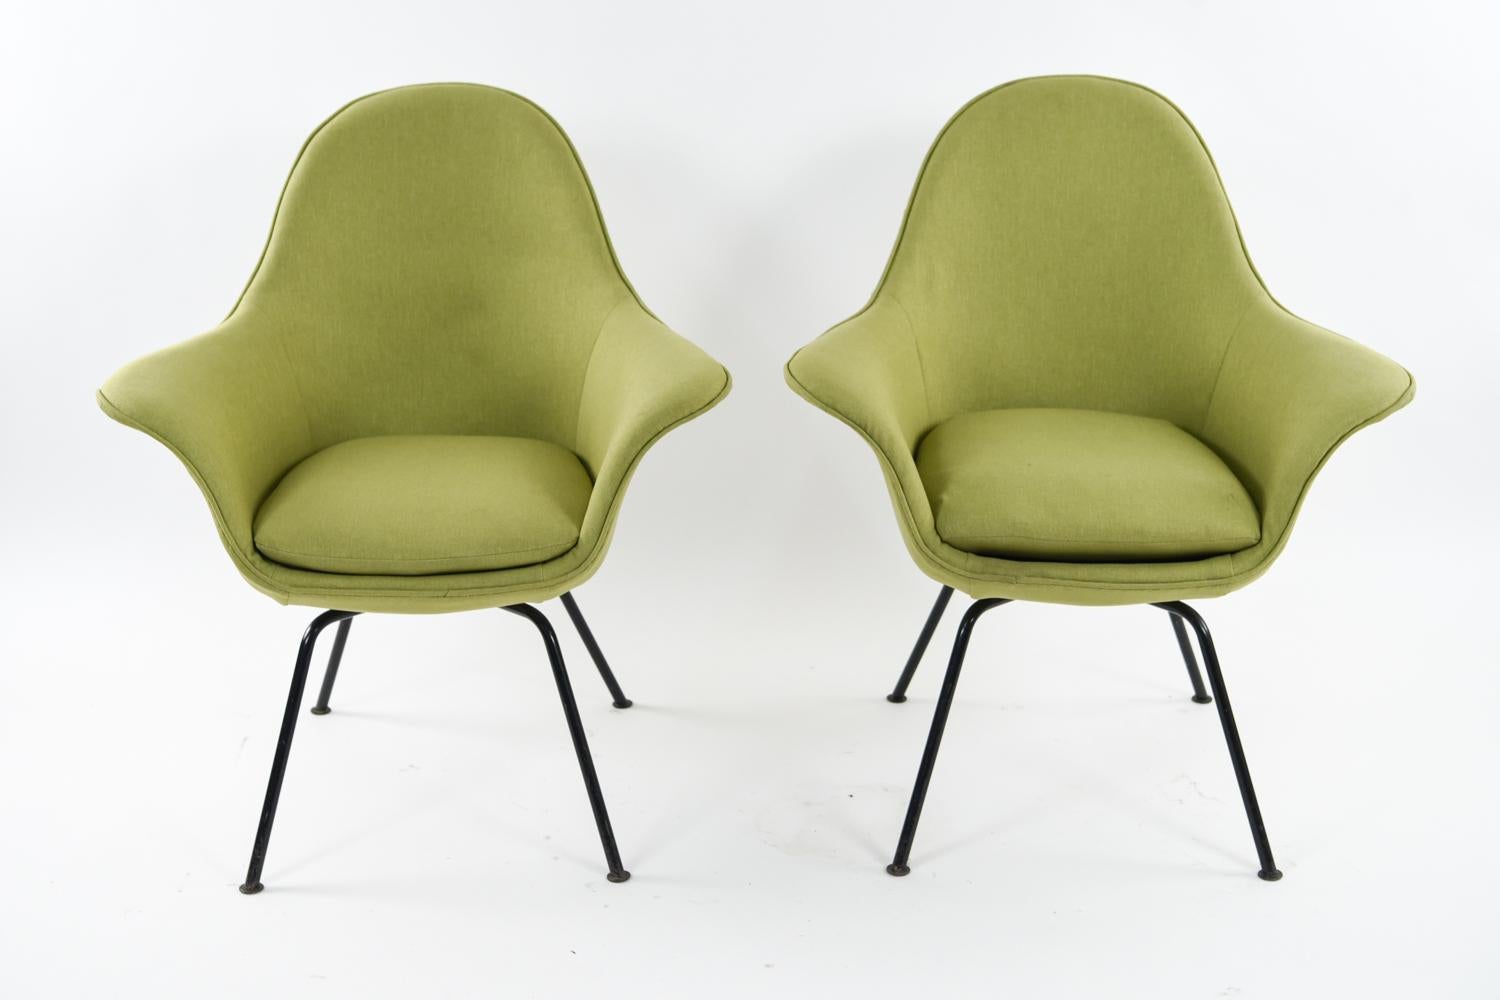 Pair of lounge chairs designed by Hans Bellman for Strässle, Switzerland in 1954. Chairs feature period green gabardine upholstery and black painted metal legs. The fabulous midcentury design of these chairs is matched only by their comfort! Labeled